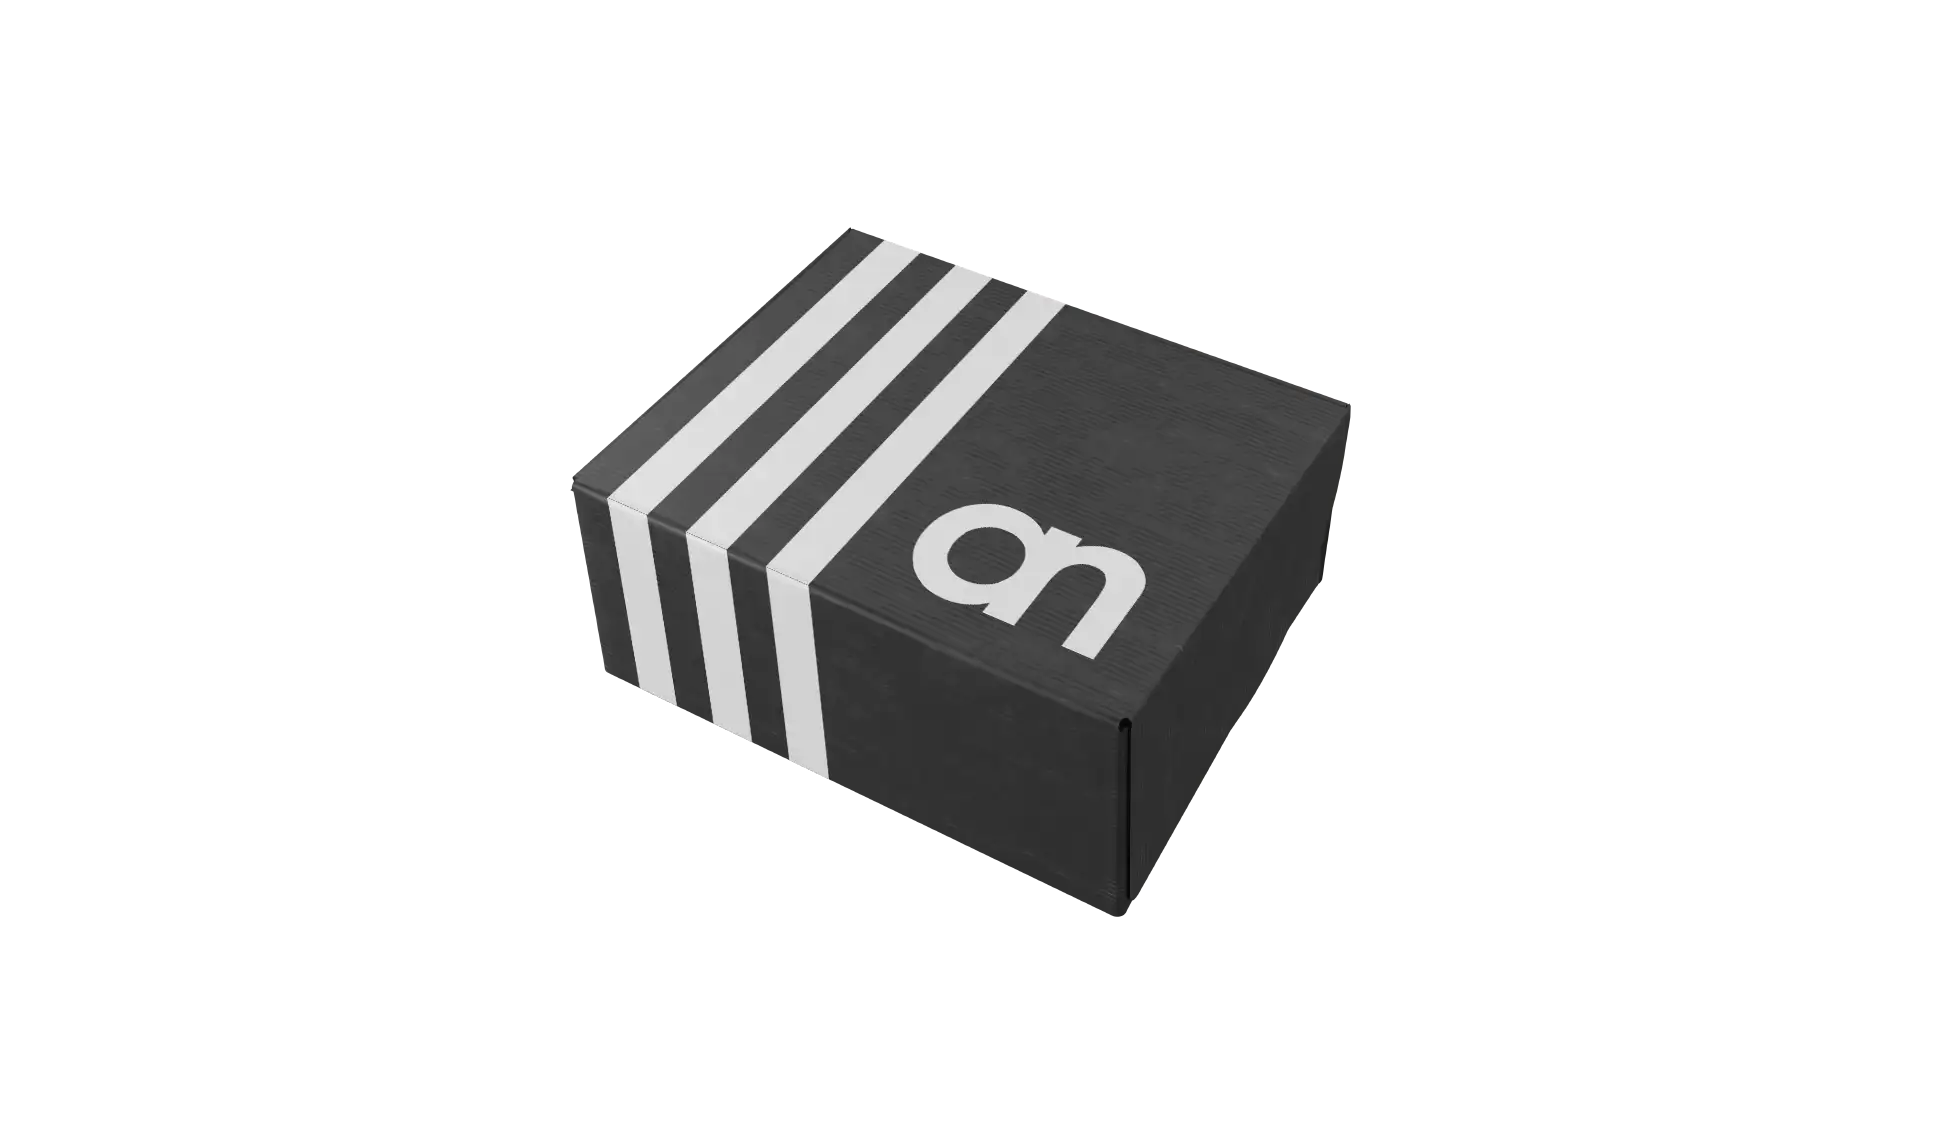 A black box with white stripes and an apparel brand.